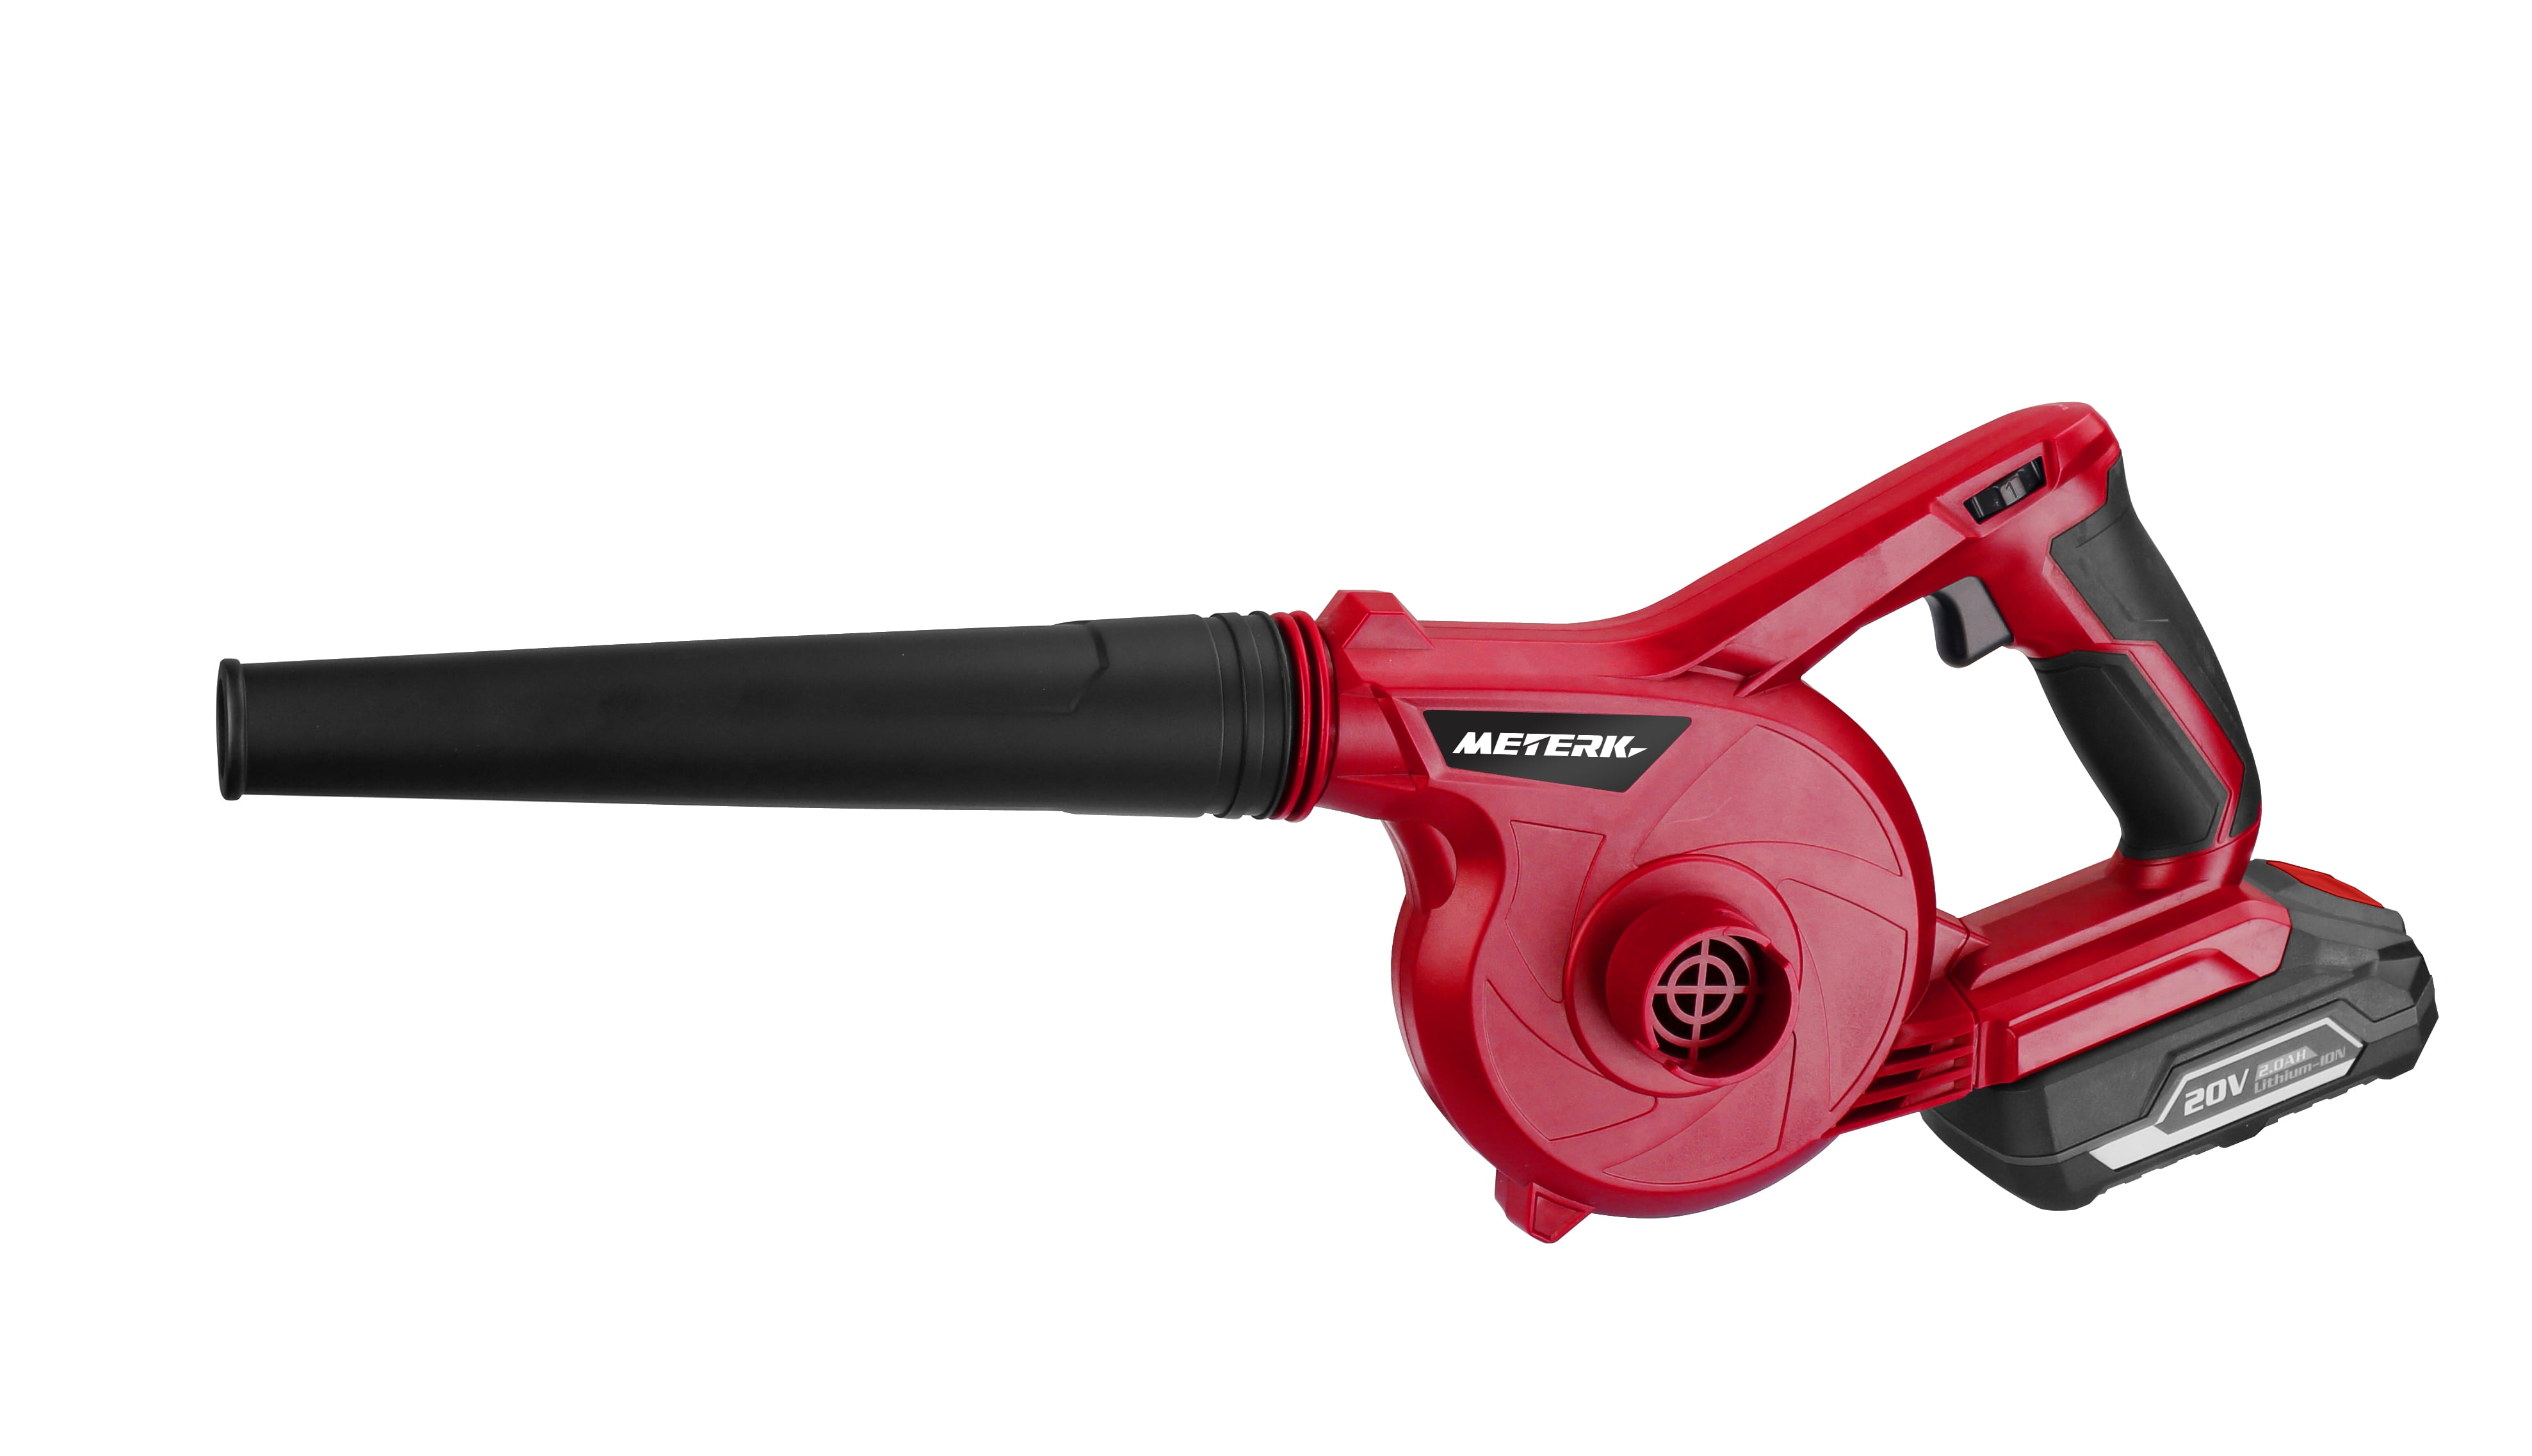 Tegatok Mini Leaf Blower, 2 in 1 Leaf Blower Cordless with Battery